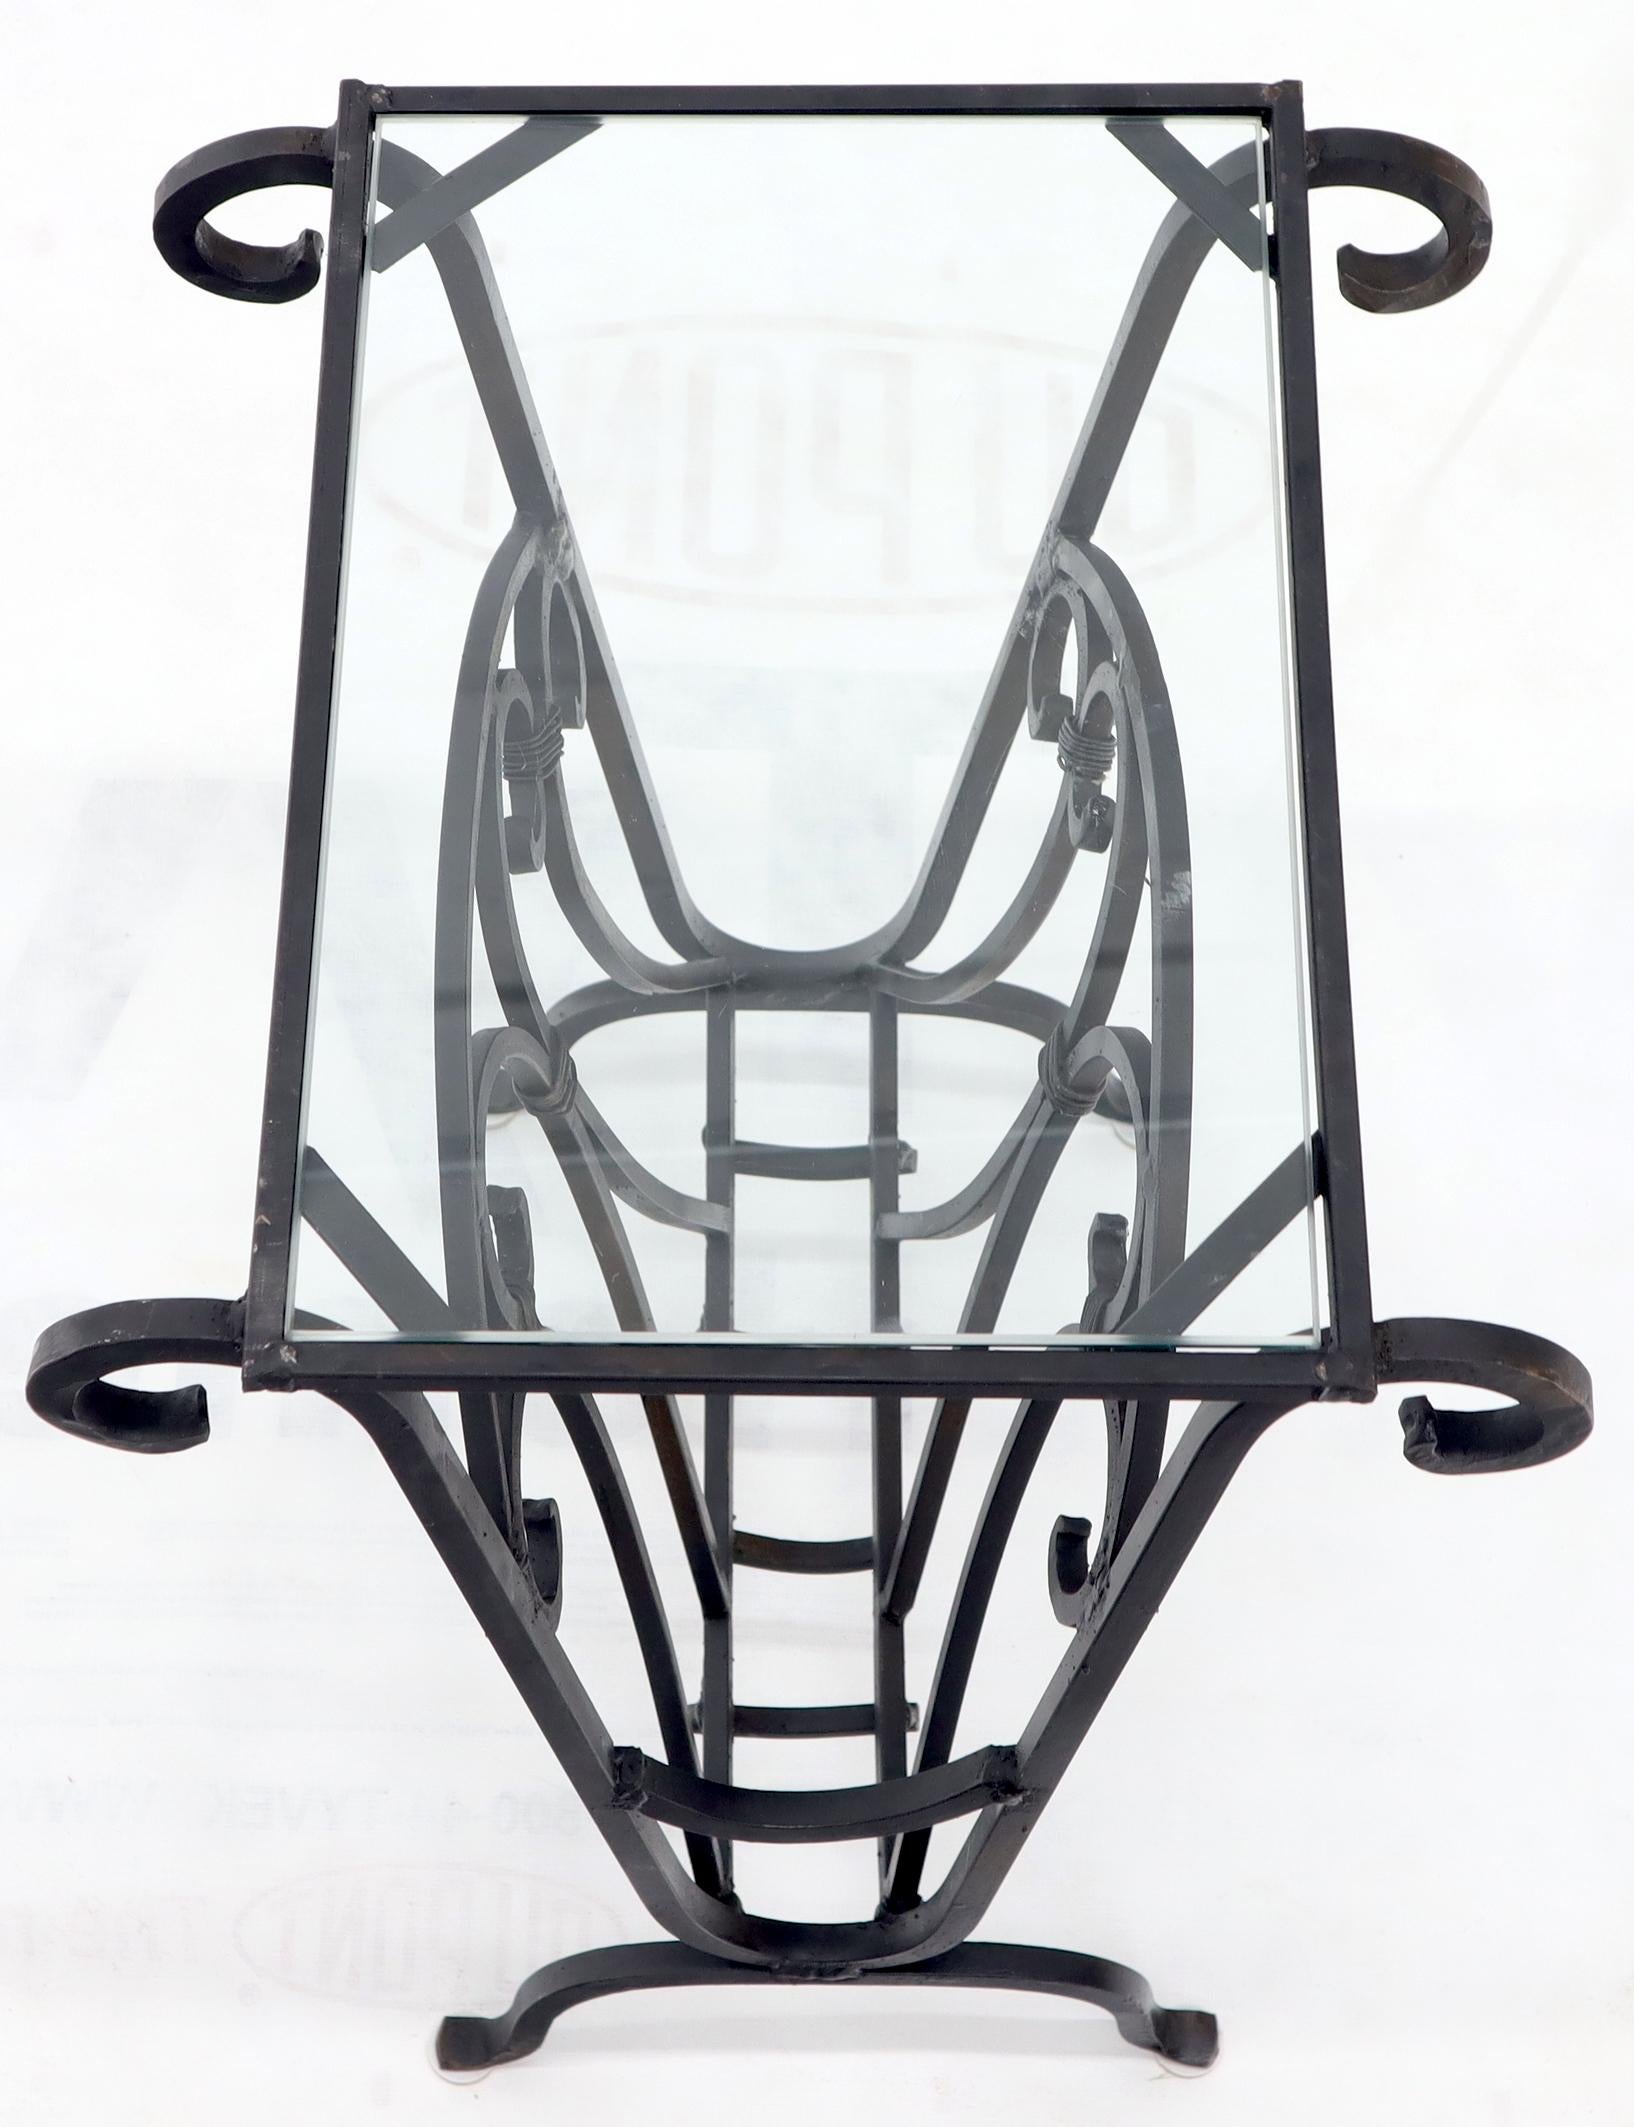 Decorative wrought iron magazine stand rack end table with glass top.